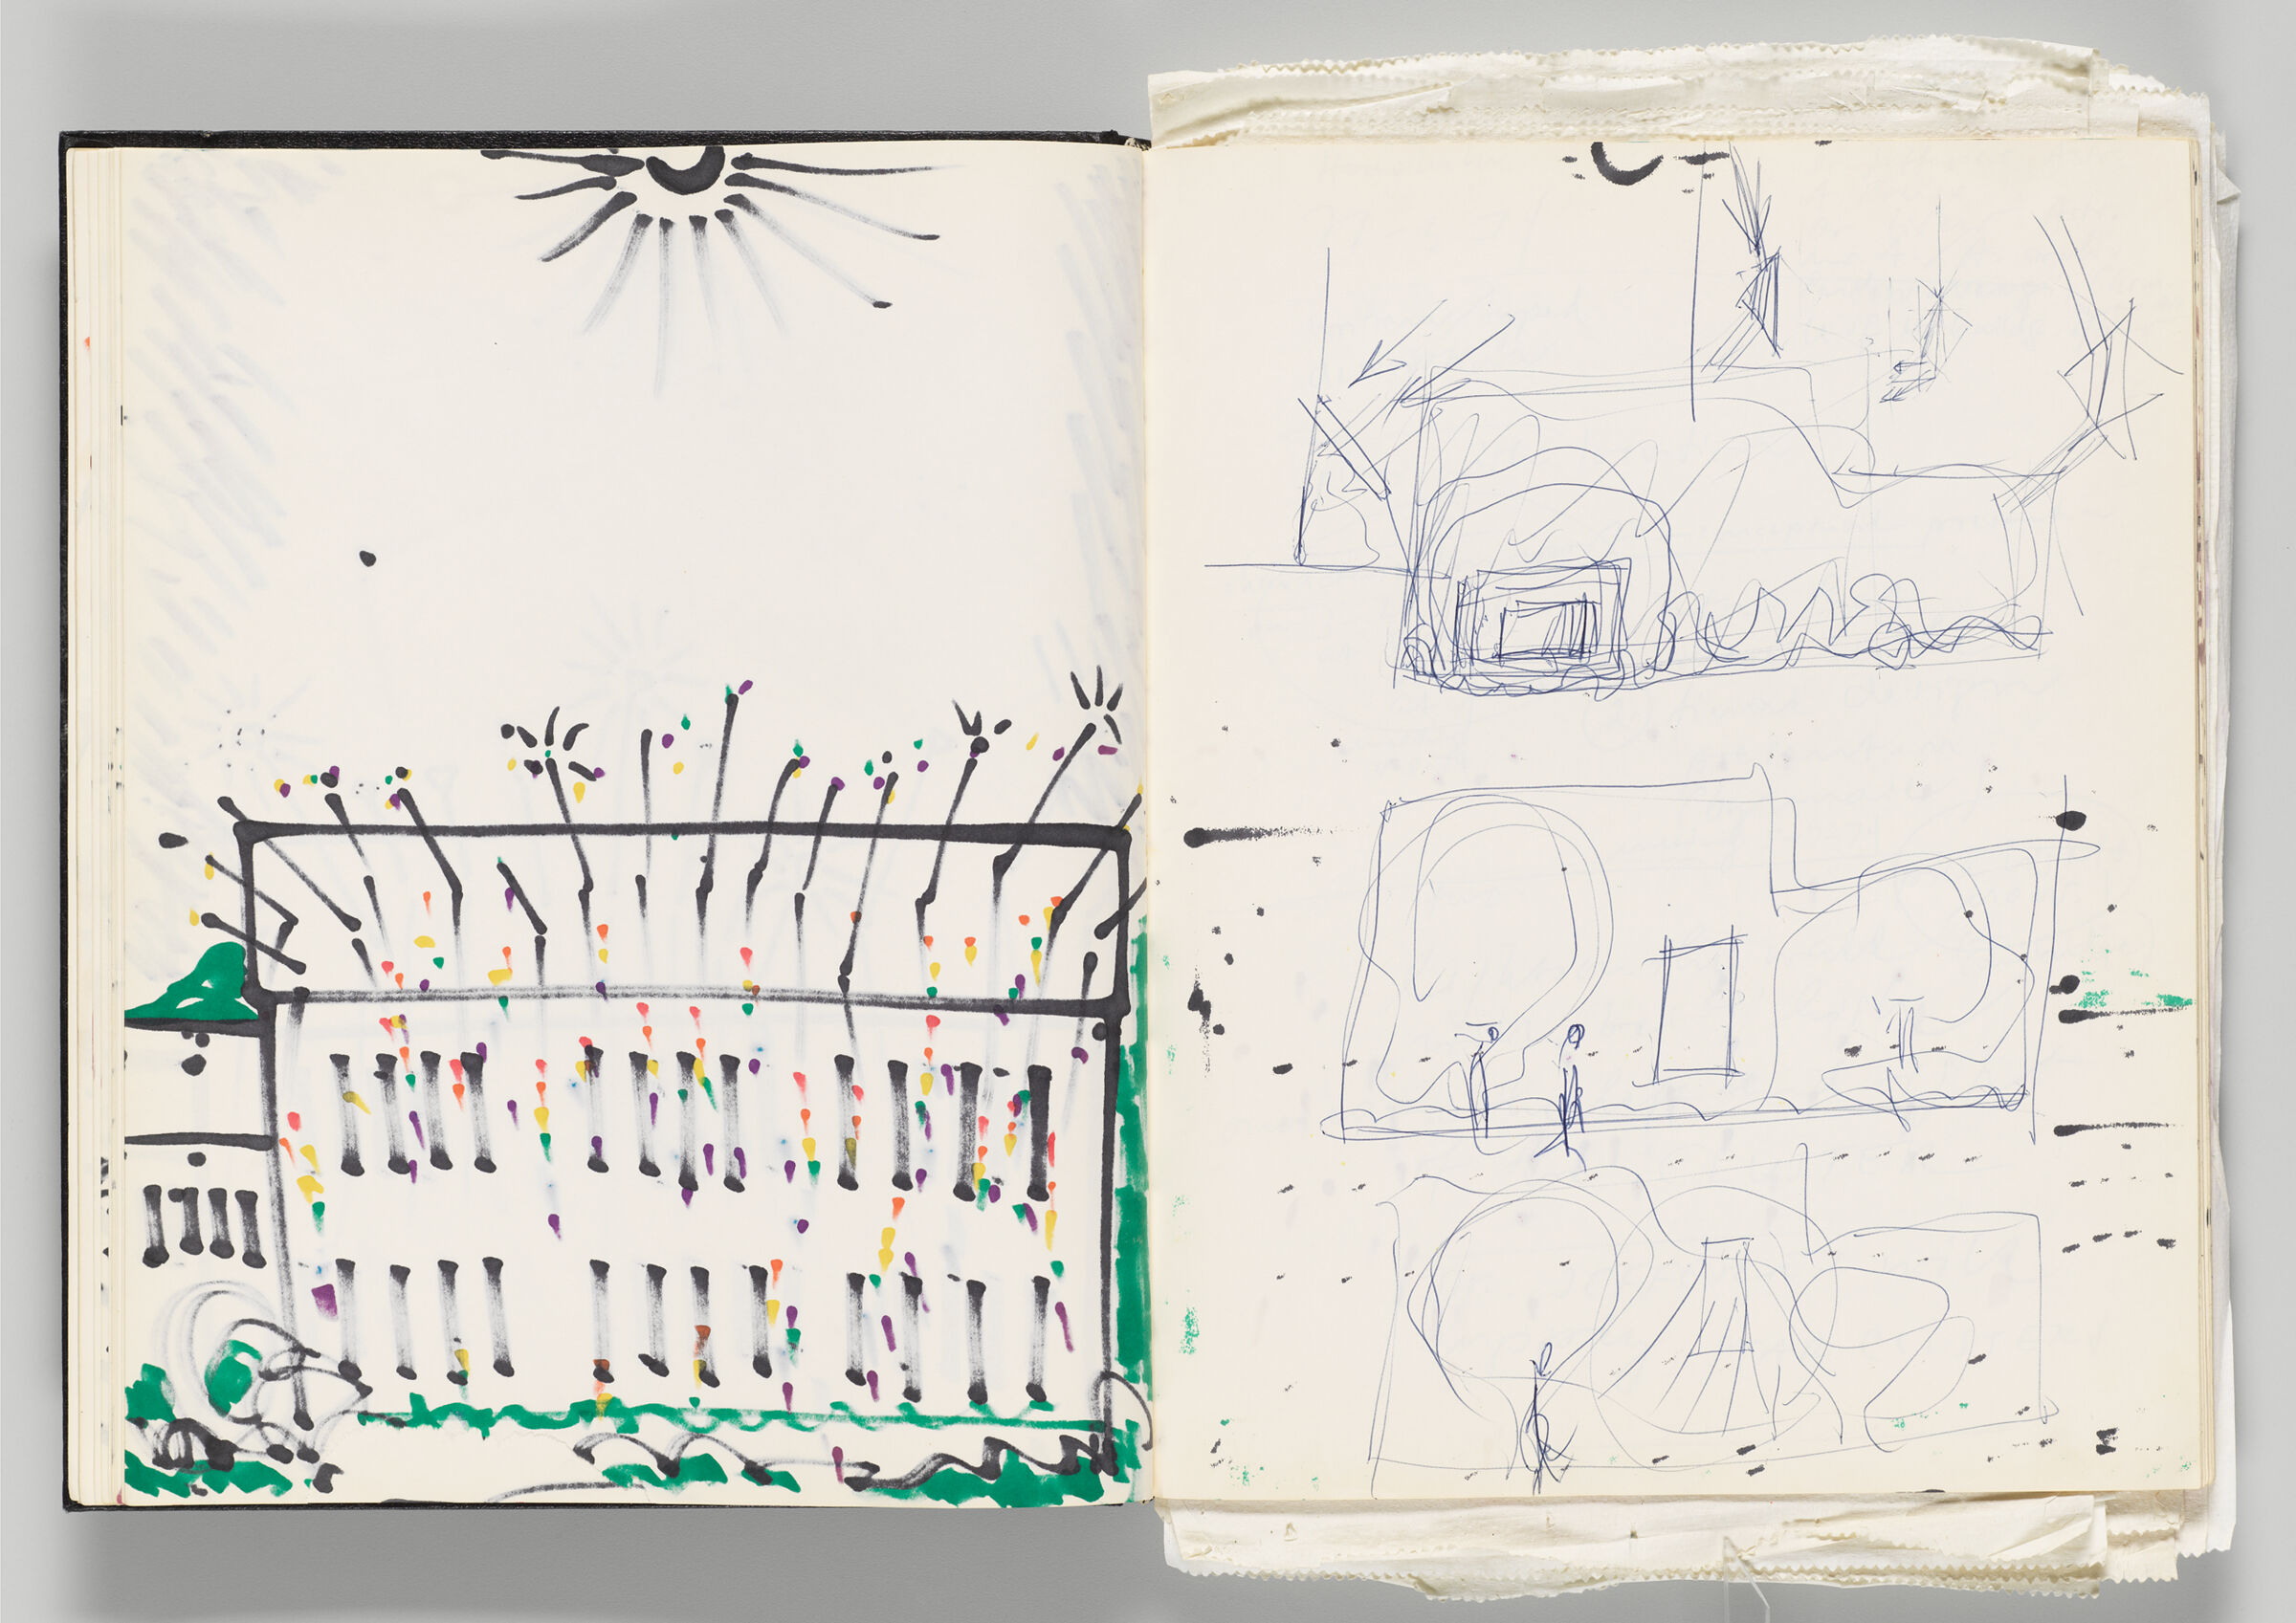 Untitled (Bleed-Through Of Previous Page, Left Page); Untitled (Facades With Figures, Right Page)